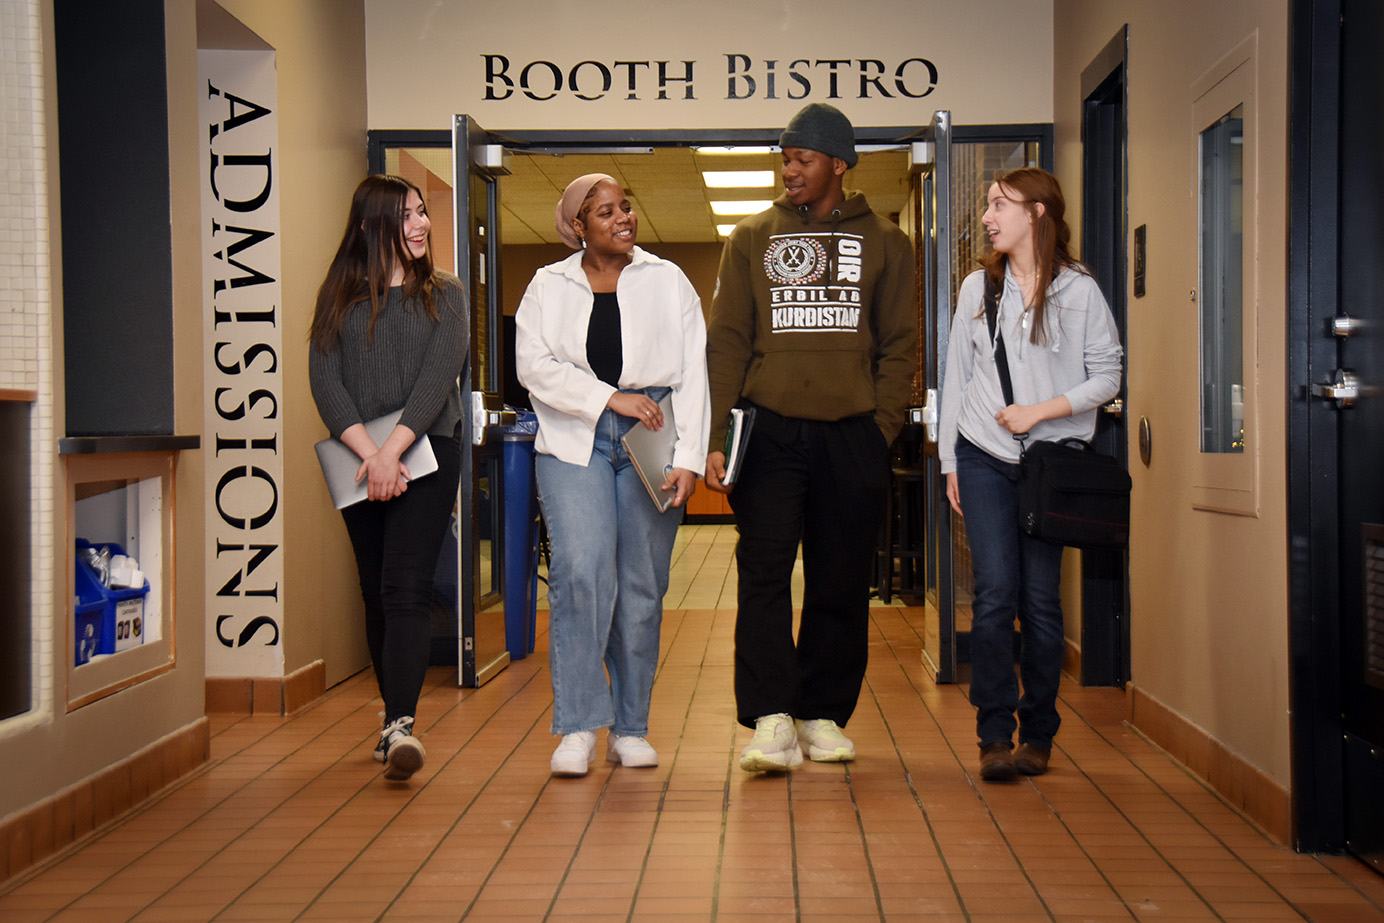 Four students holding textbooks walk together in a hallway.